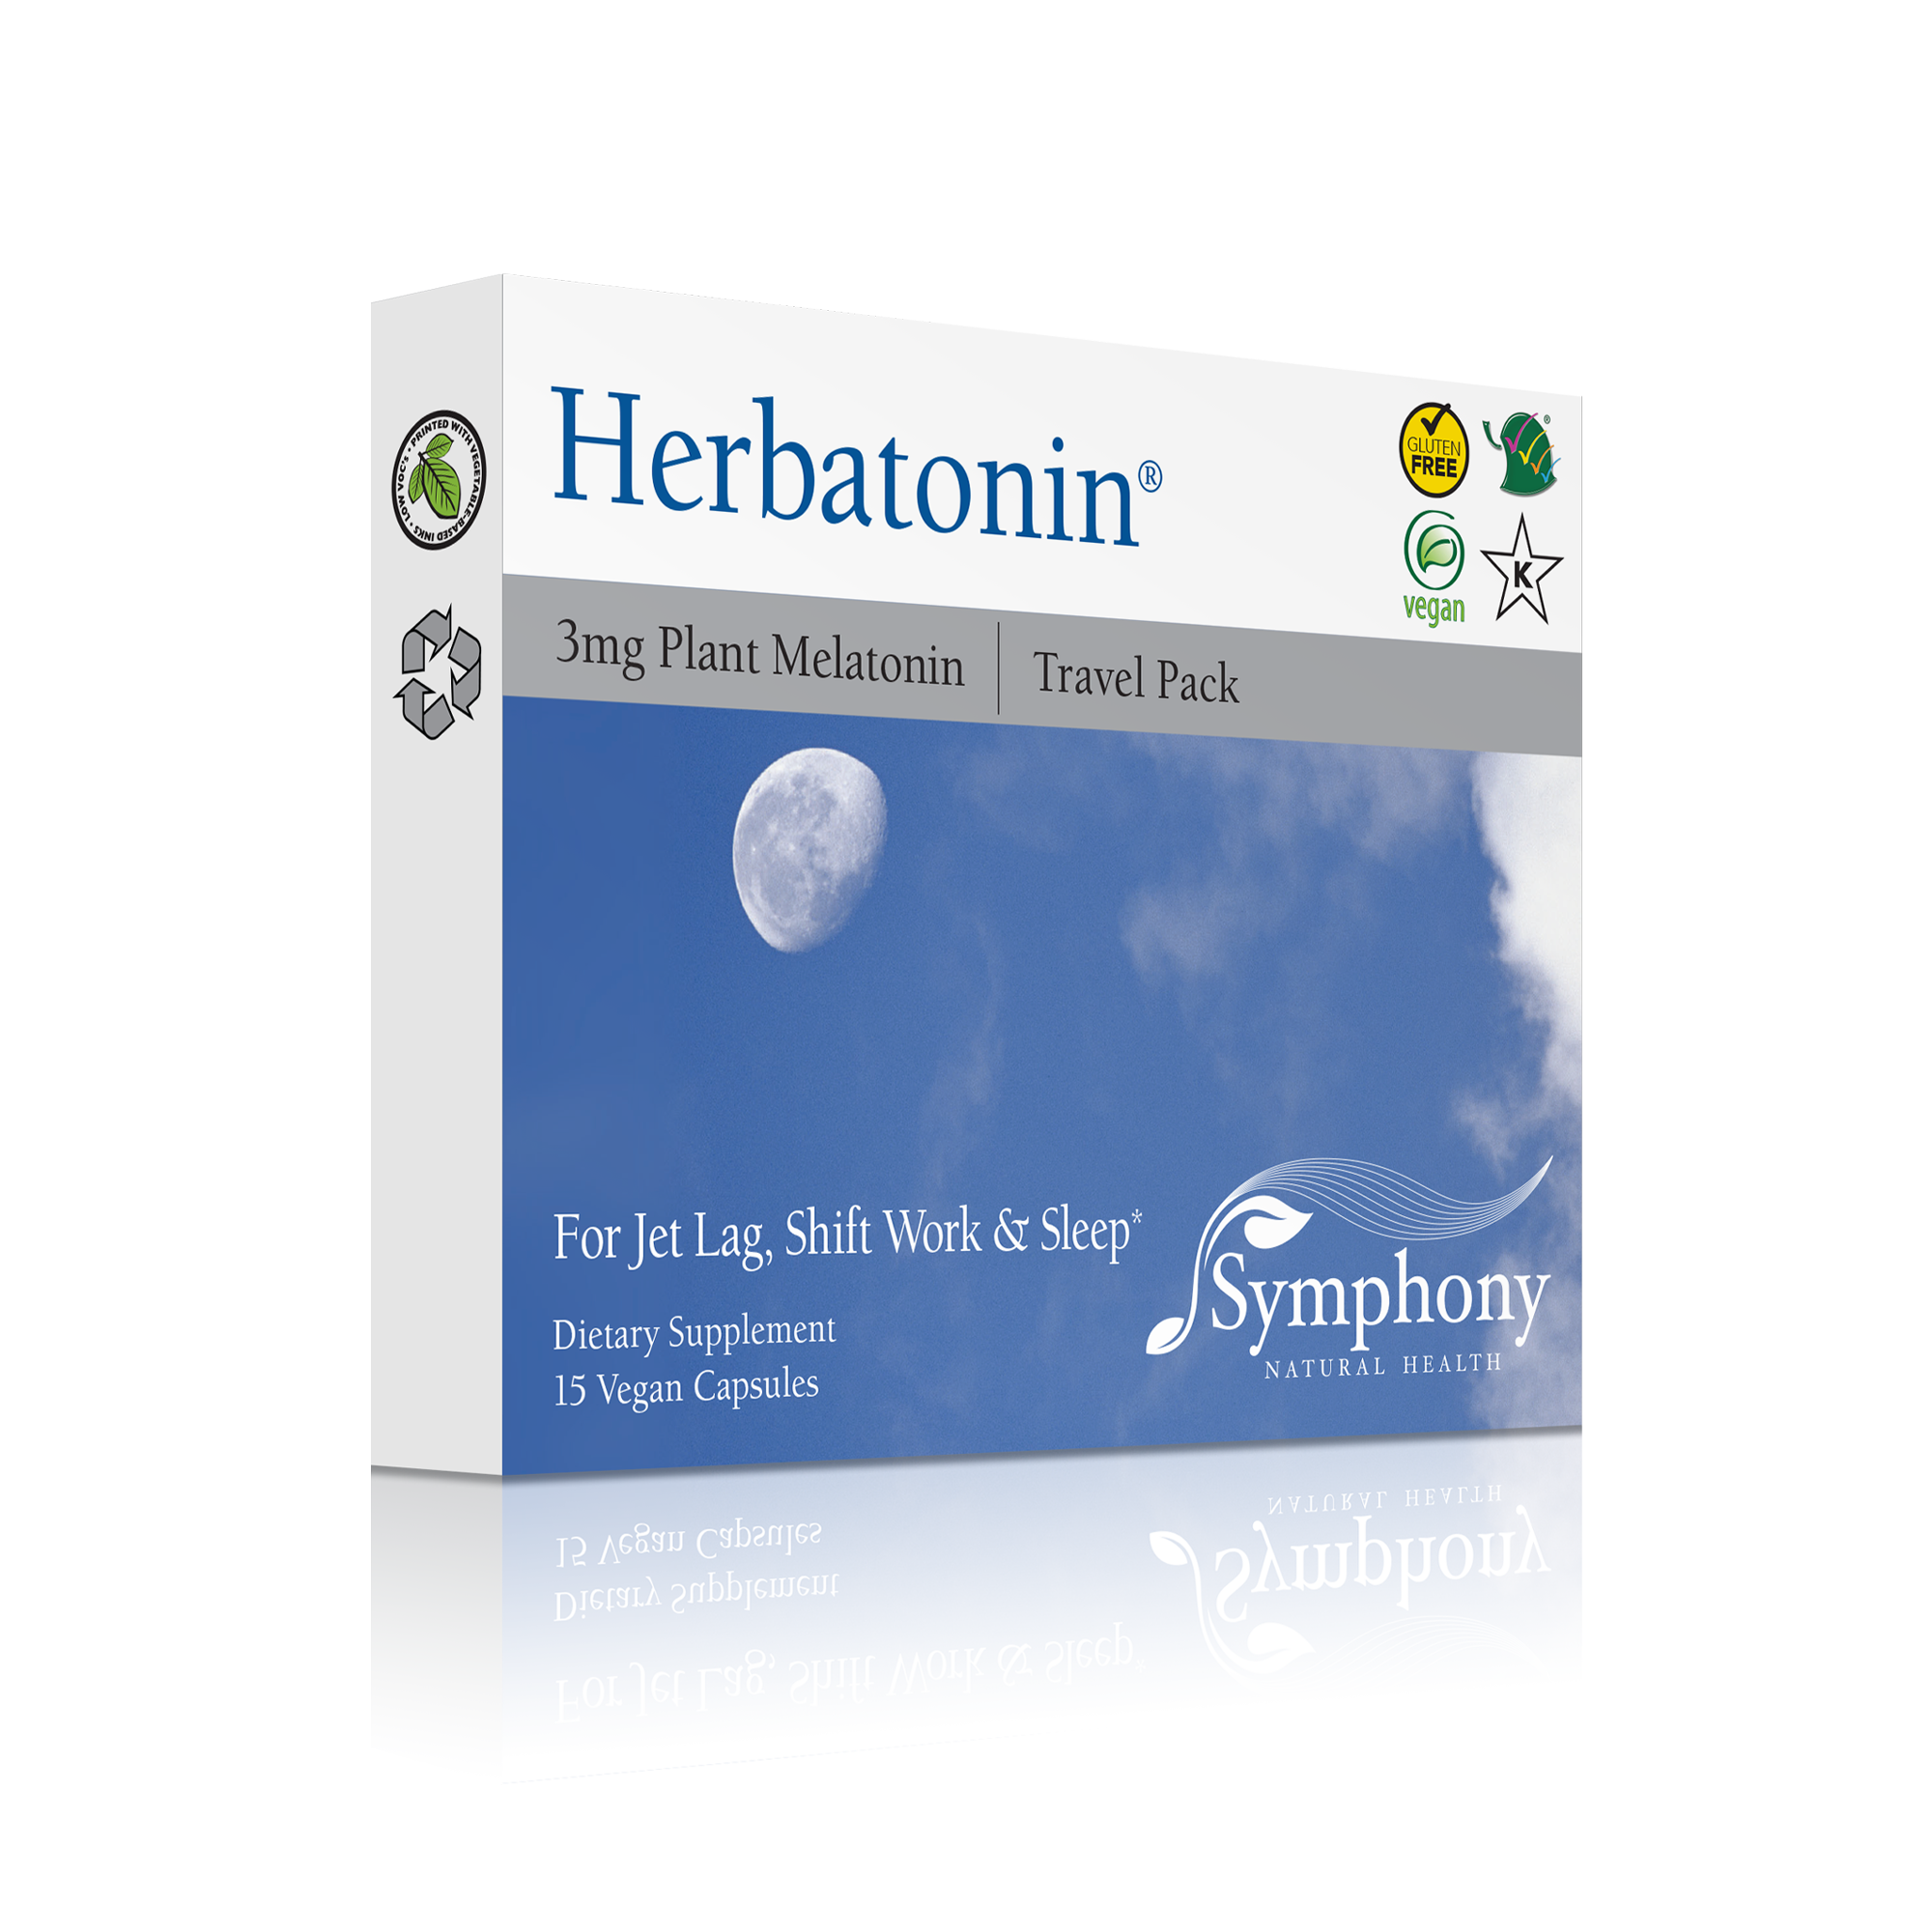 Herbatonin 3mg Travel Pack right-facing front and side of two product boxes Herbatonin blue logo on black background, moon in daylight blue sky and clouds, gluten free, vegan and Kosher logos, symphony logo